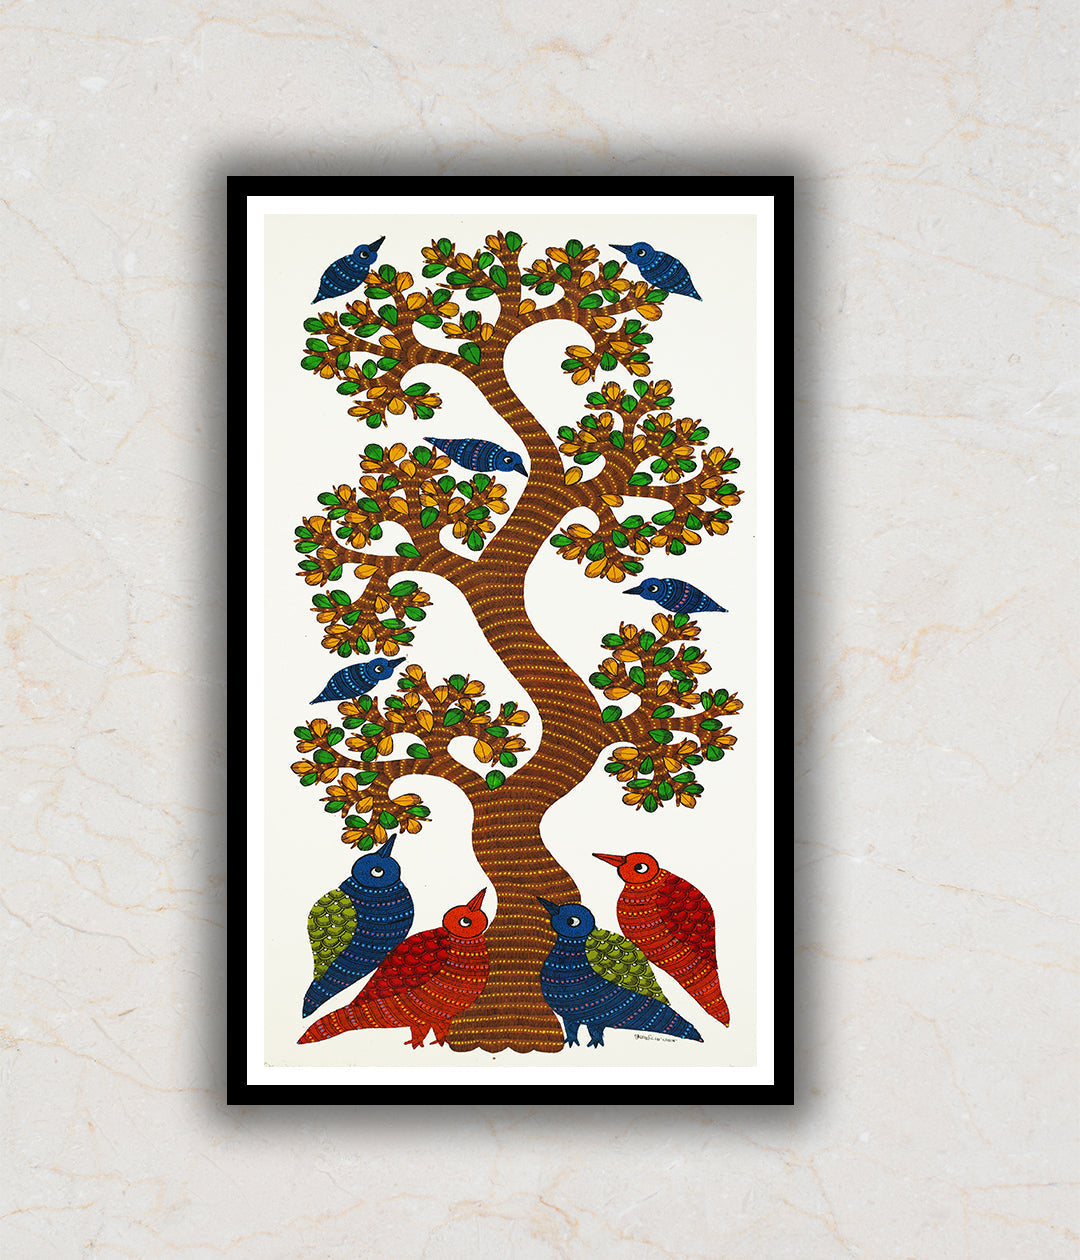 Ancestry Gond Art Painting For Home Wall Art Decor